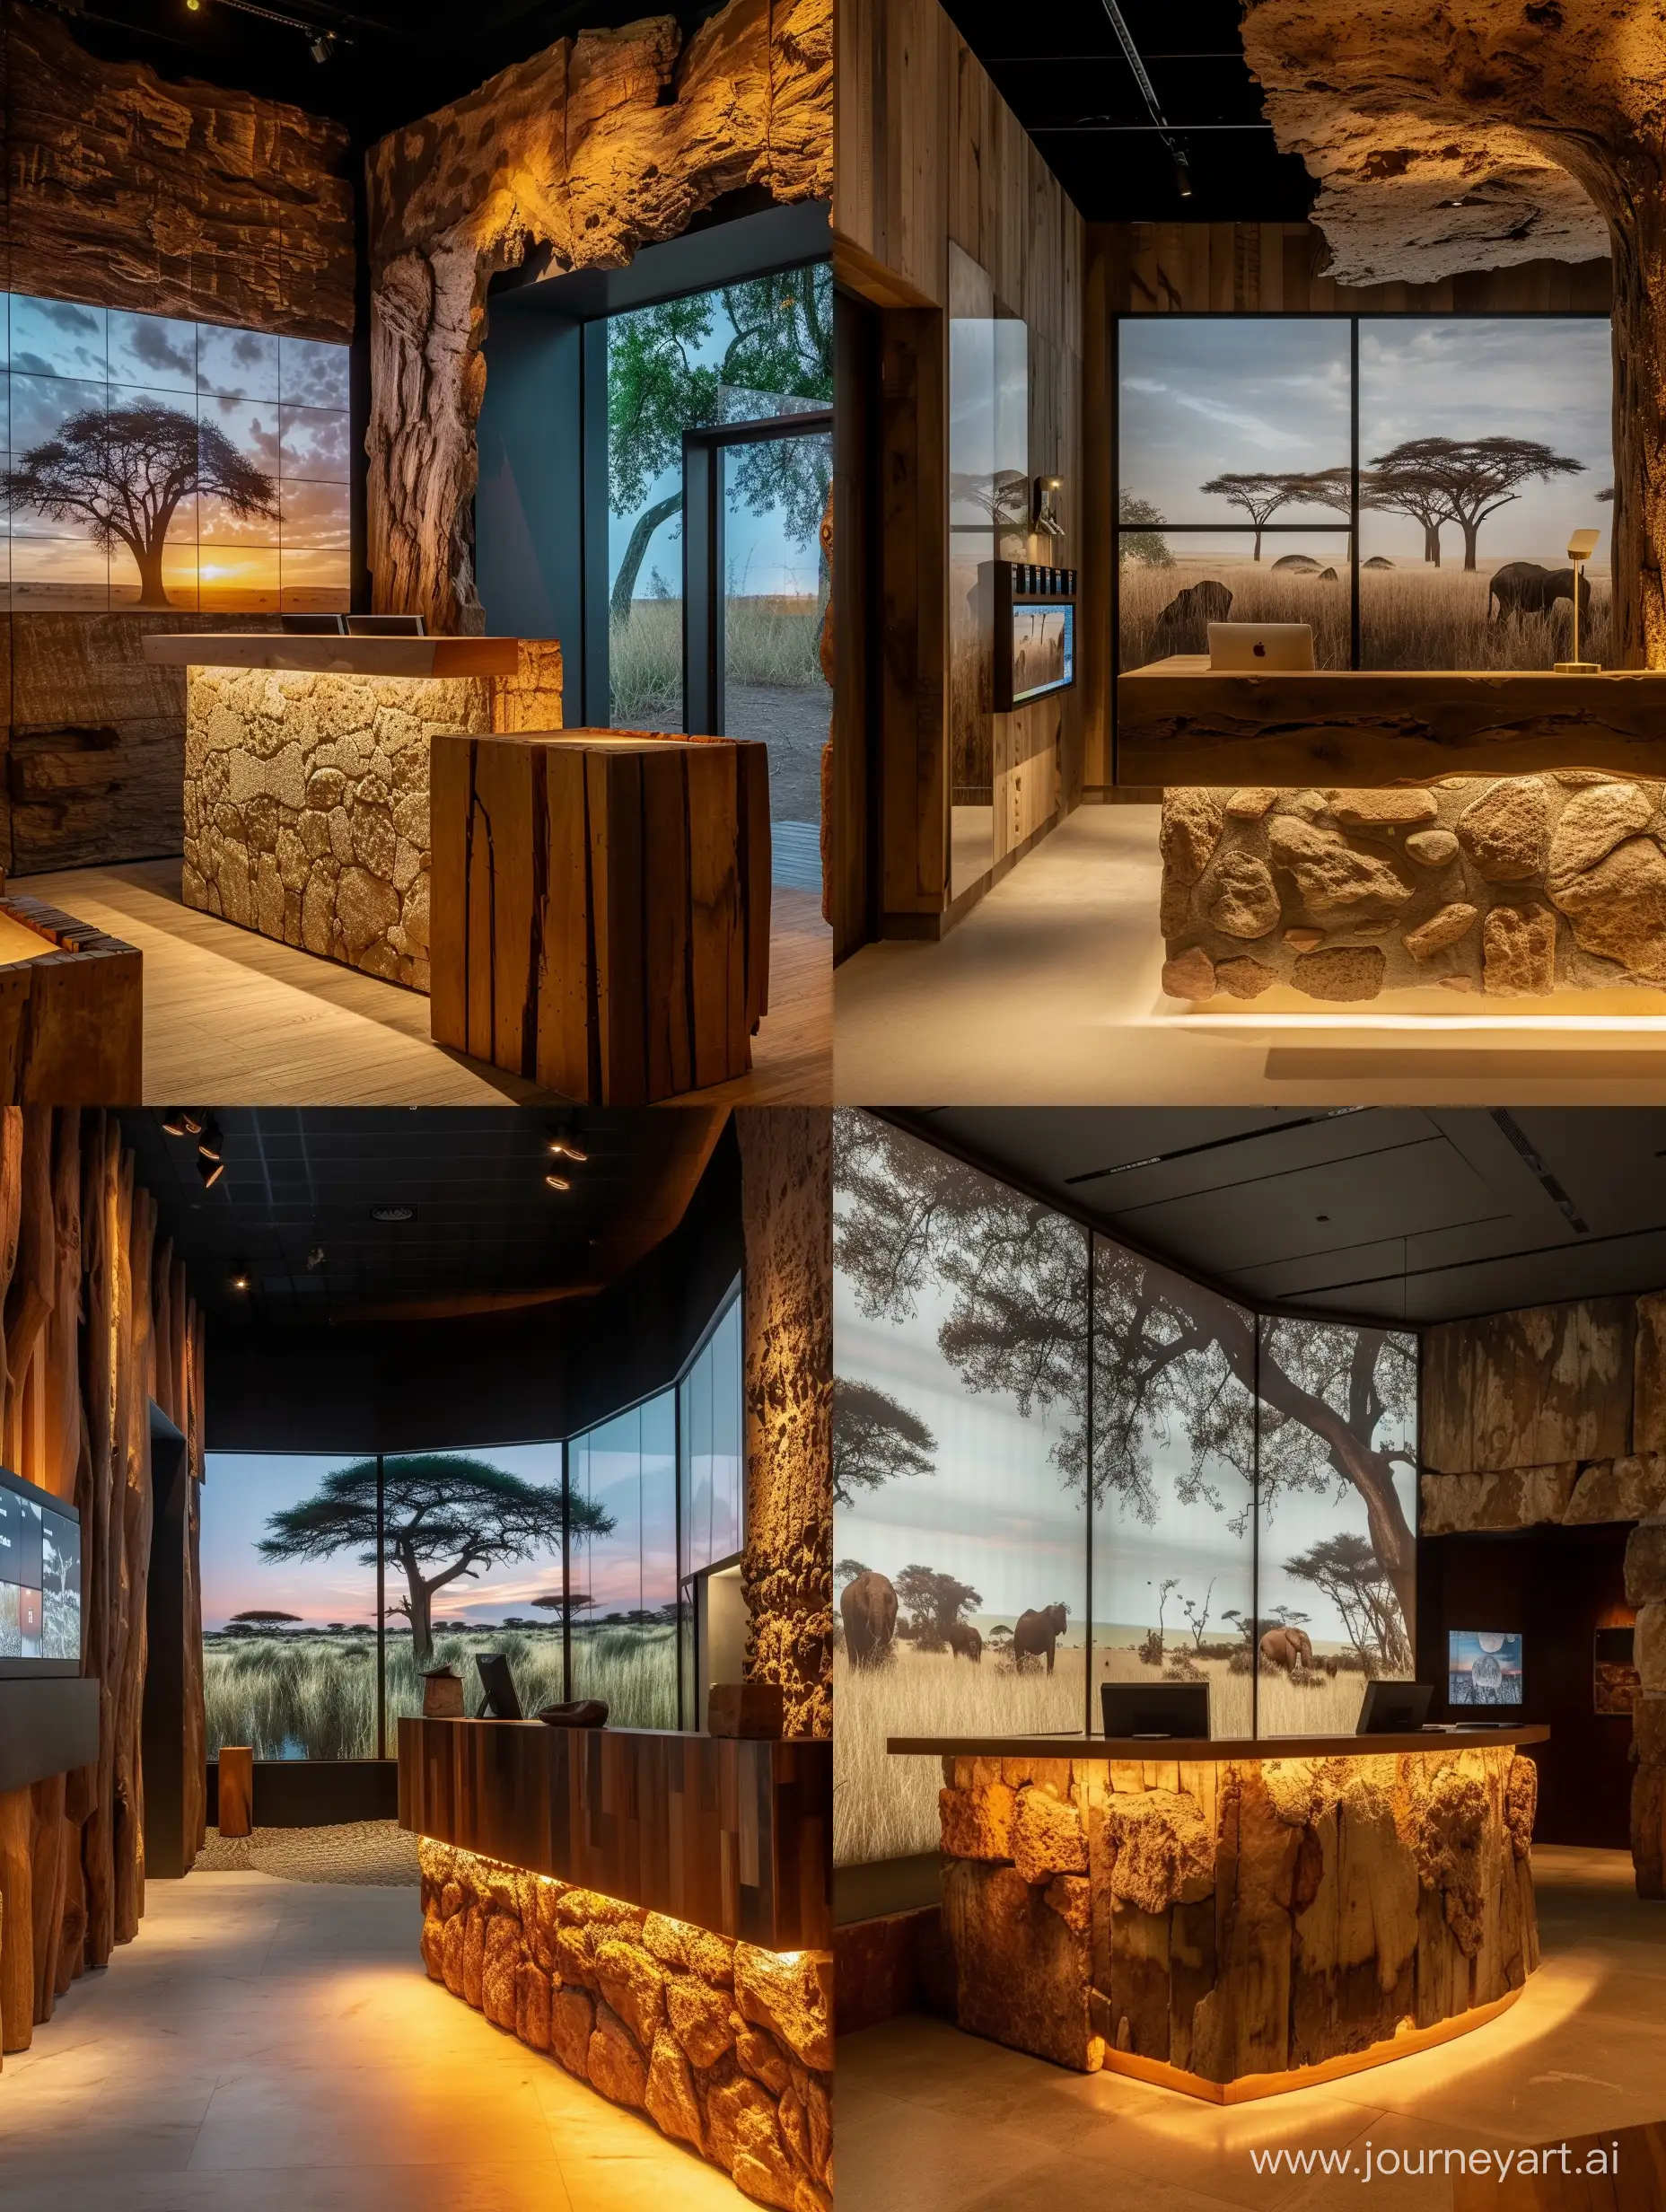 Imagine small minimal Entrance Area: "Step into the entrance of the 'Serenity of the Savannah' showroom, where the journey begins. Here, the reception desk, crafted from reclaimed wood and adorned with a stone facade, stands as a testament to sustainable luxury. The area is illuminated by soft, ambient lighting, highlighting digital screens that display the sweeping landscapes of the African savannah, inviting visitors to explore further." african style interior